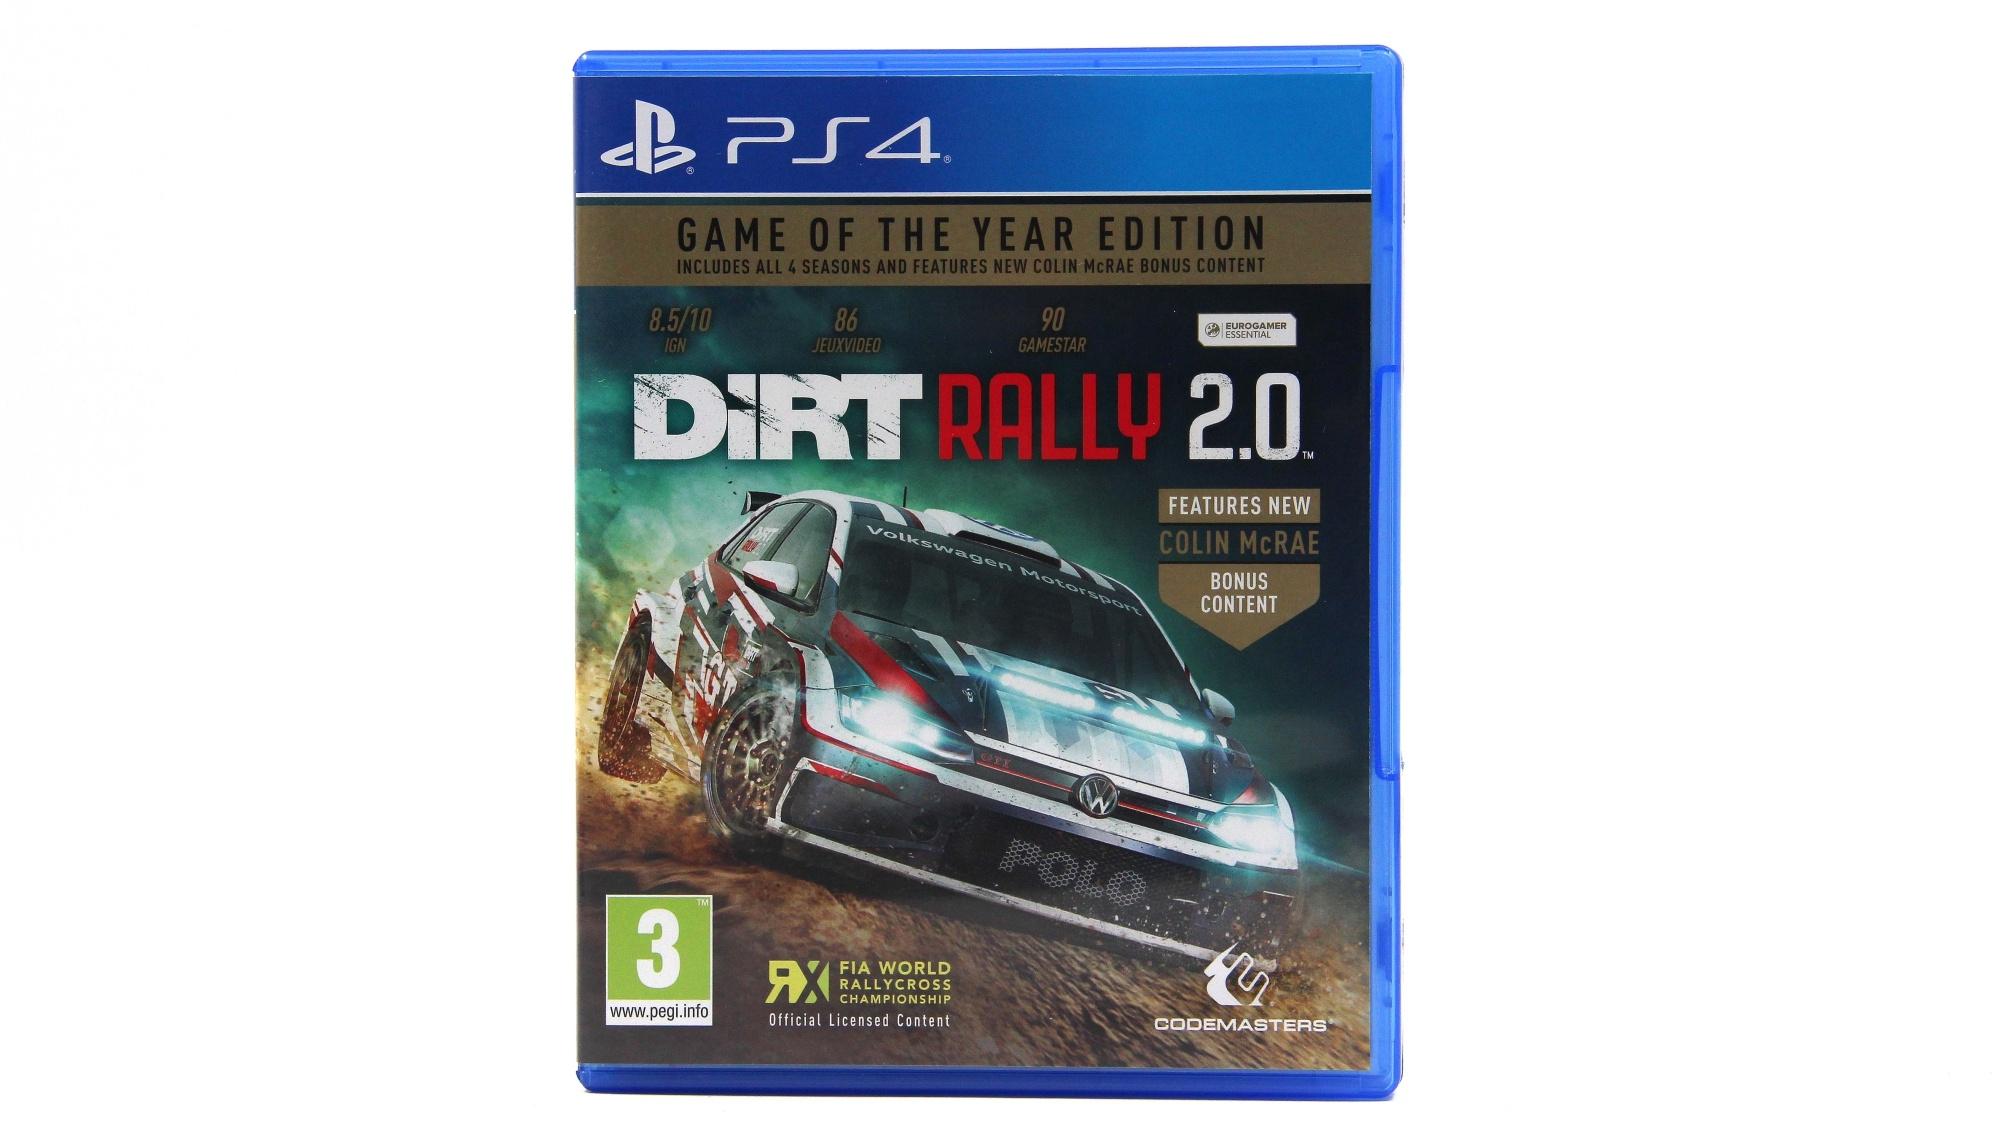 Dirt ps4. Dirt Rally 2.0. Dirt Rally 2.0 PS. Дёрт ралли 2.0 диск ps4. Dirt Rally ps4.